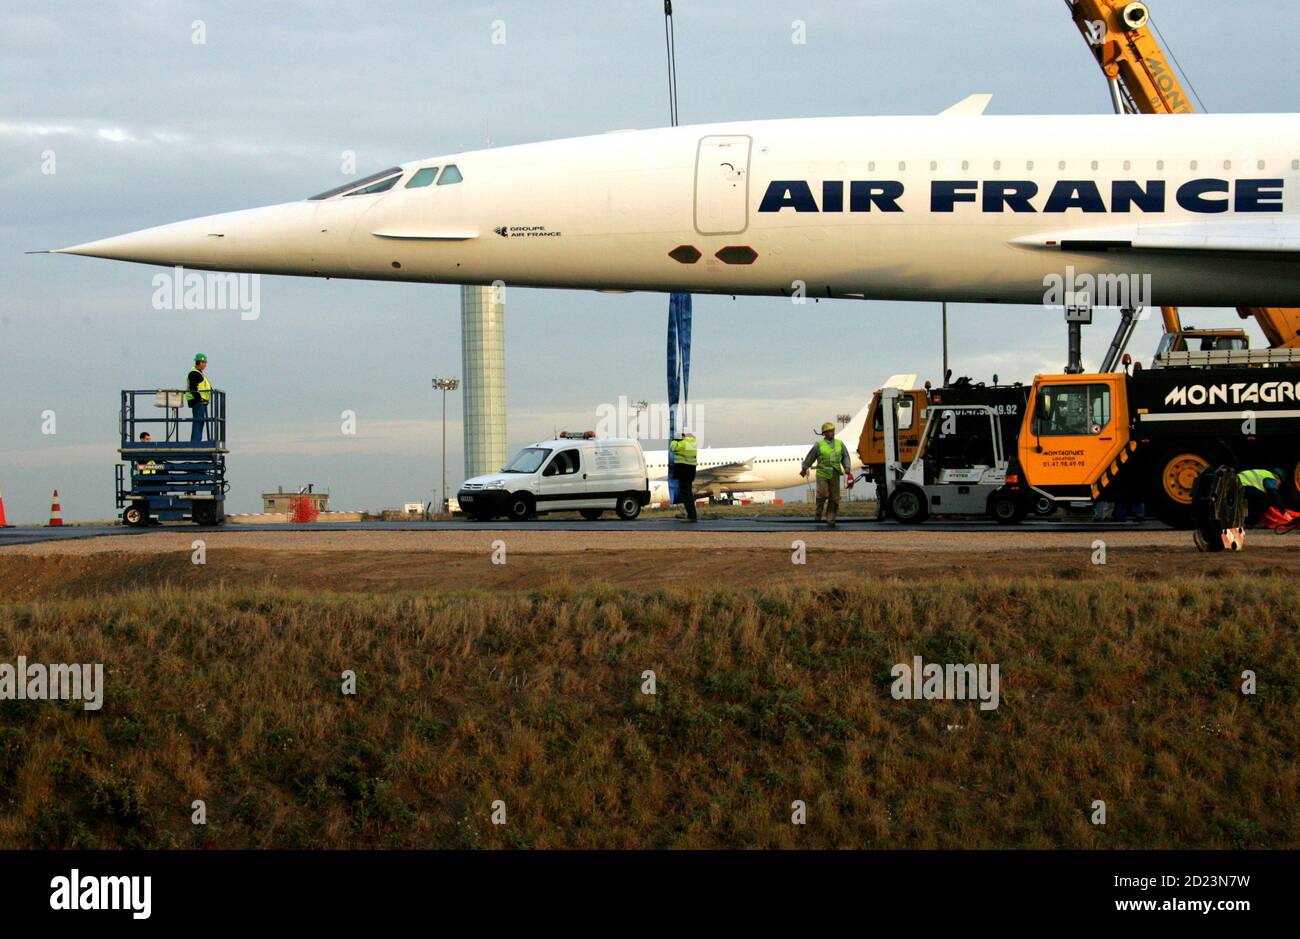 Employees prepare to lower the retired Air France Concorde number 5 by cranes onto pylons on the tarmac at the Roissy-Charles de Gaulle Airport, north of Paris October 19, 2005. The retired Concorde is placed on permanent display in an inclined position to simulate the take off of the supersonic passenger jet. Stock Photo